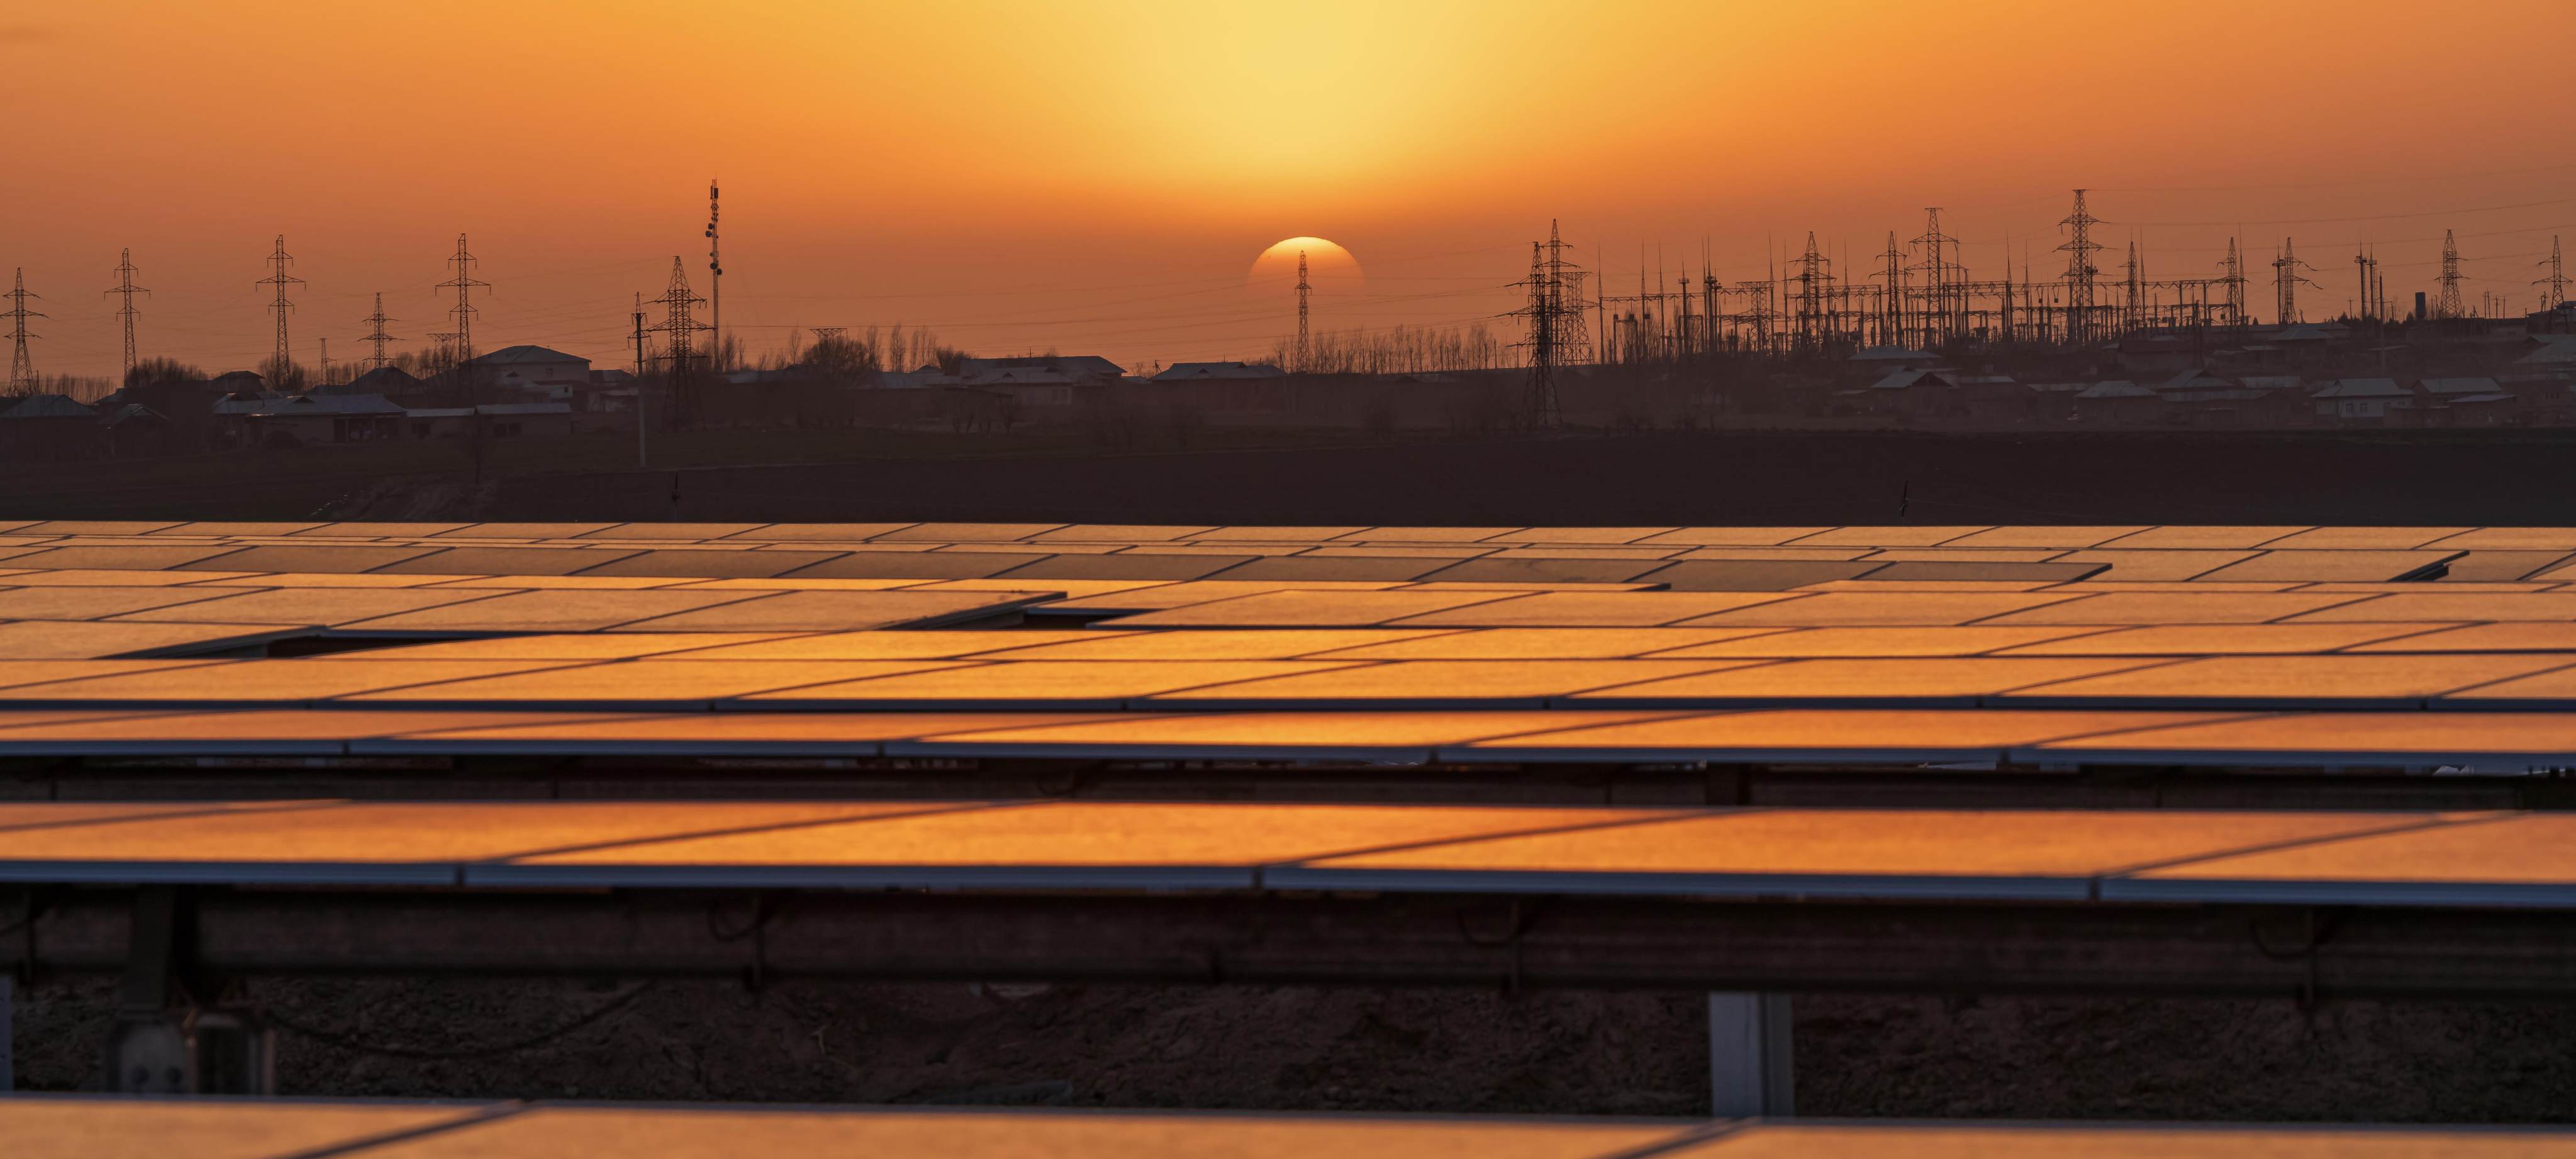 A solar power plant built by China’s Dongfang Electric Corporation in Samarkand, Uzbekistan, on April 29. Central Asian states, particularly Uzbekistan and Kazakhstan, have been a focus for China as it attempts to turn its investments in the Belt and Road Initiative towards green energy. Photo: Handout